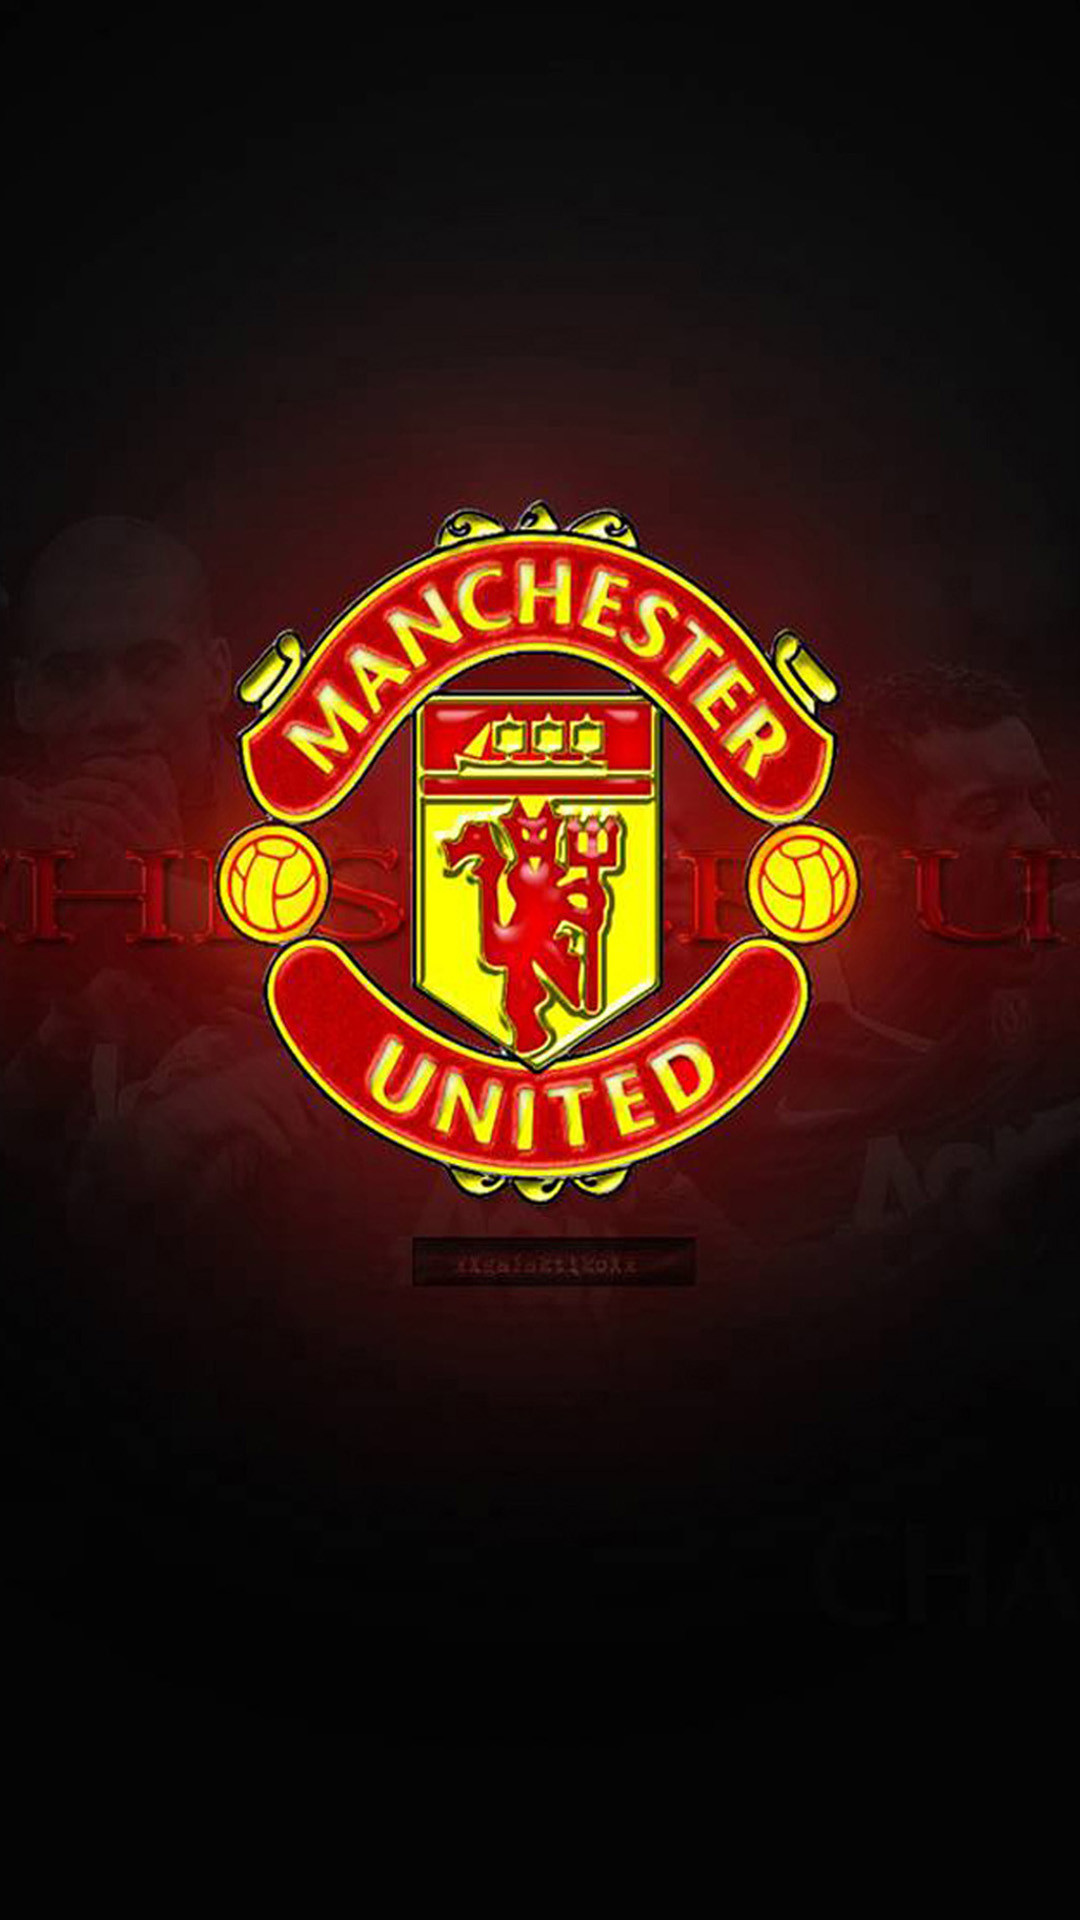 Manchester United 2 Samsung Wallpapers, Samsung Galaxy S5, Galaxy S4, Galaxy Note 3